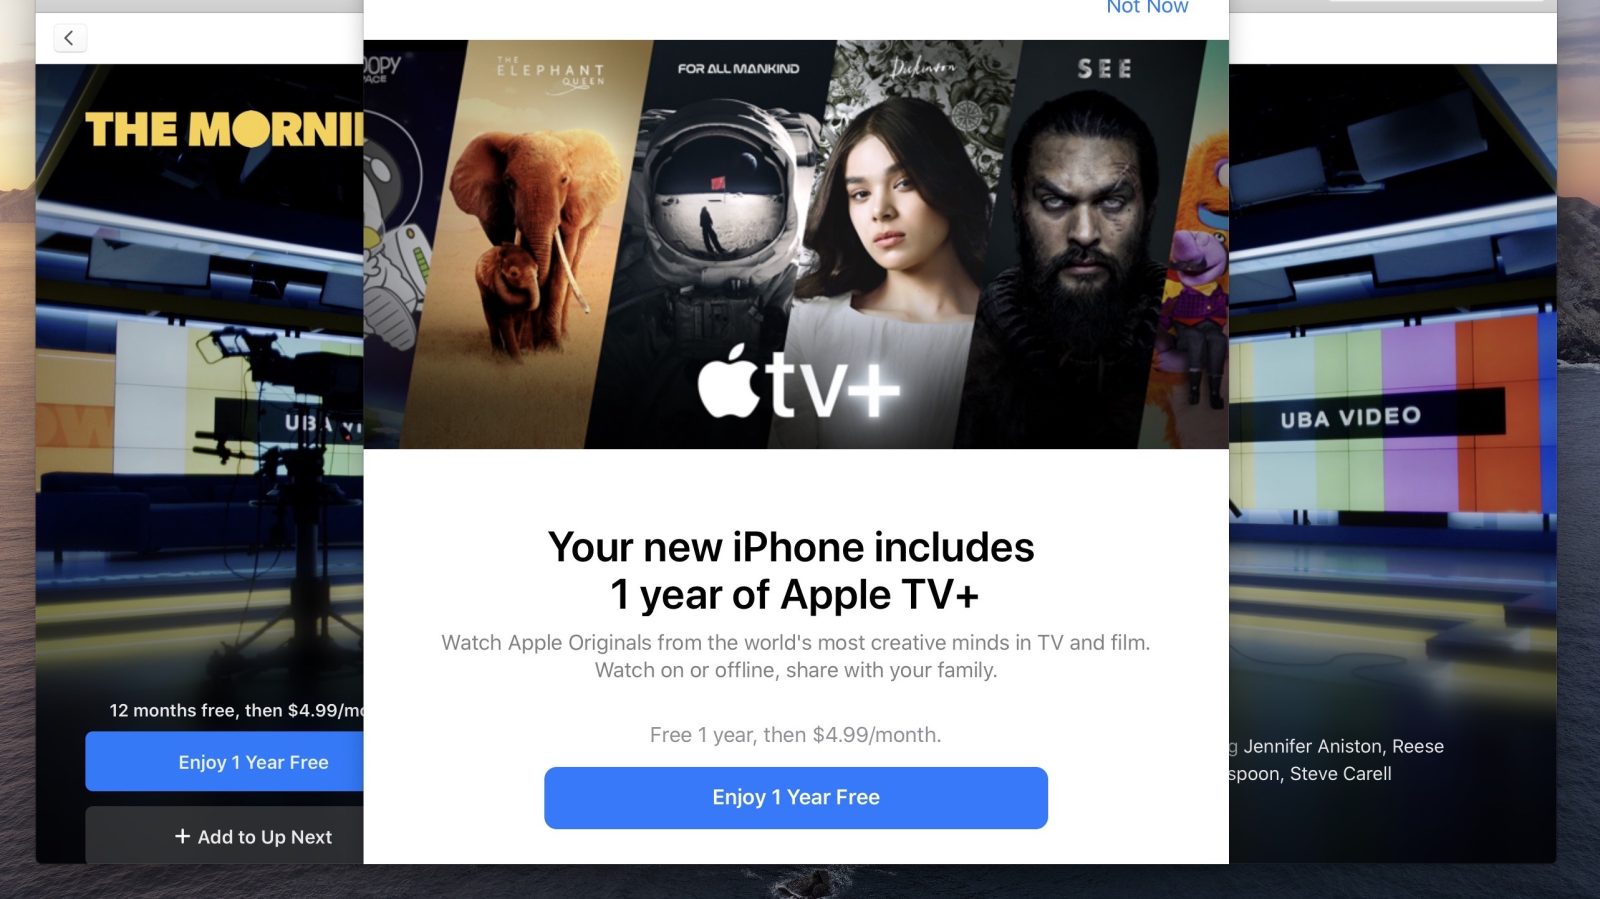 How to get free year Apple TV+ iPhone iPad Mac iPod touch Apple TV